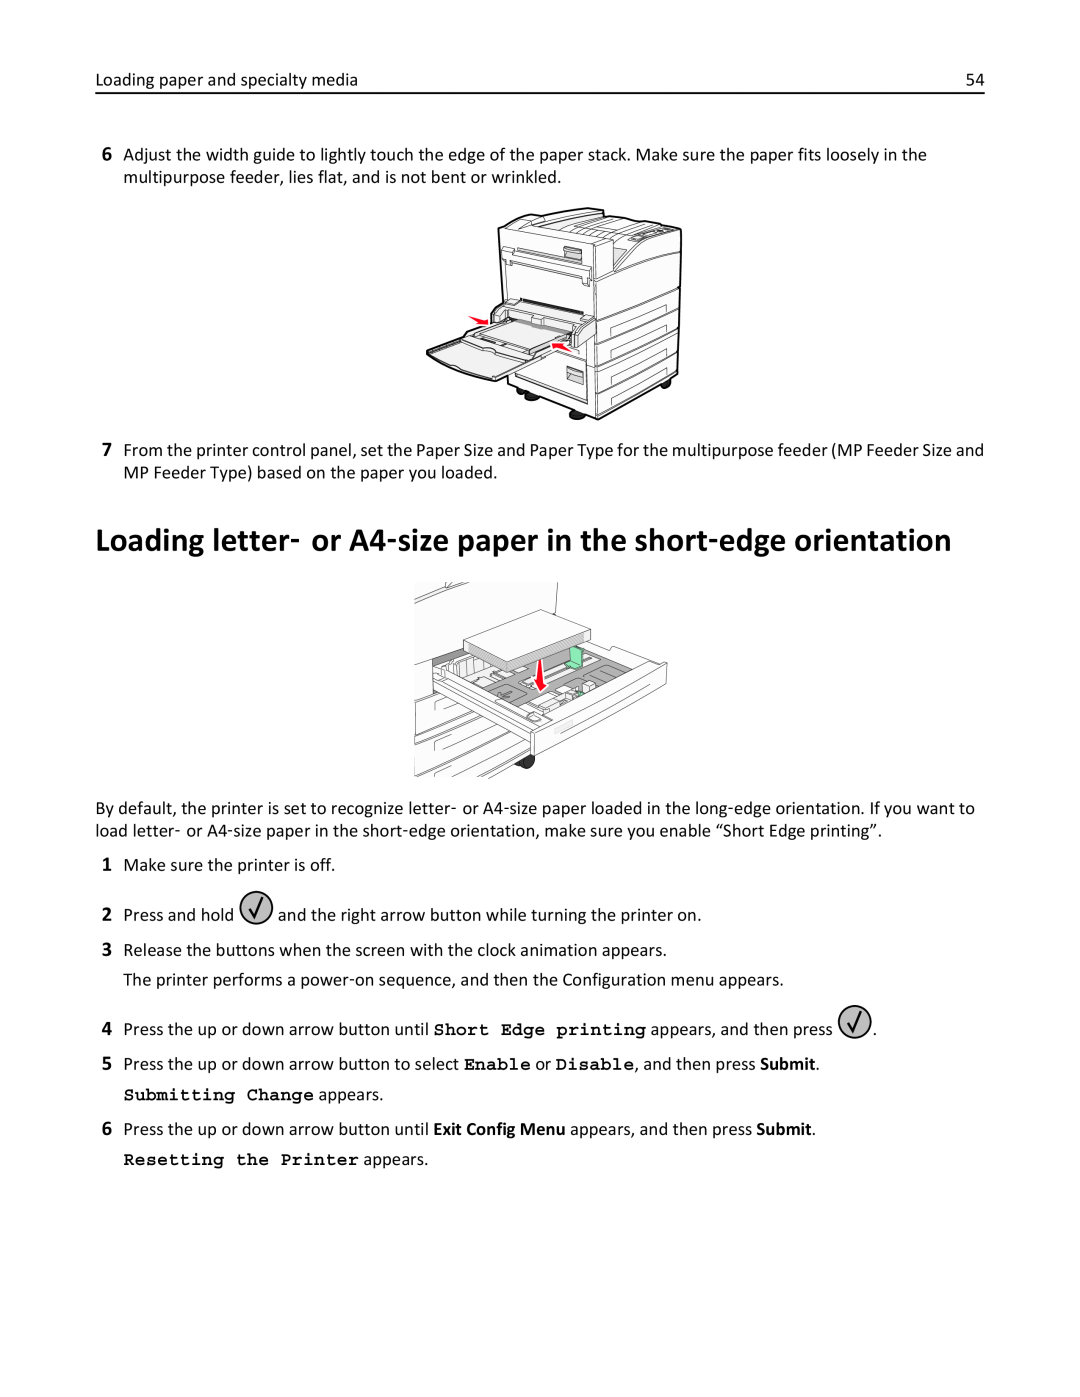 Lexmark 110, W850DN, 19Z0301 manual Loading letter‑ or A4‑size paper in the short‑edge orientation, Submitting Change appears 